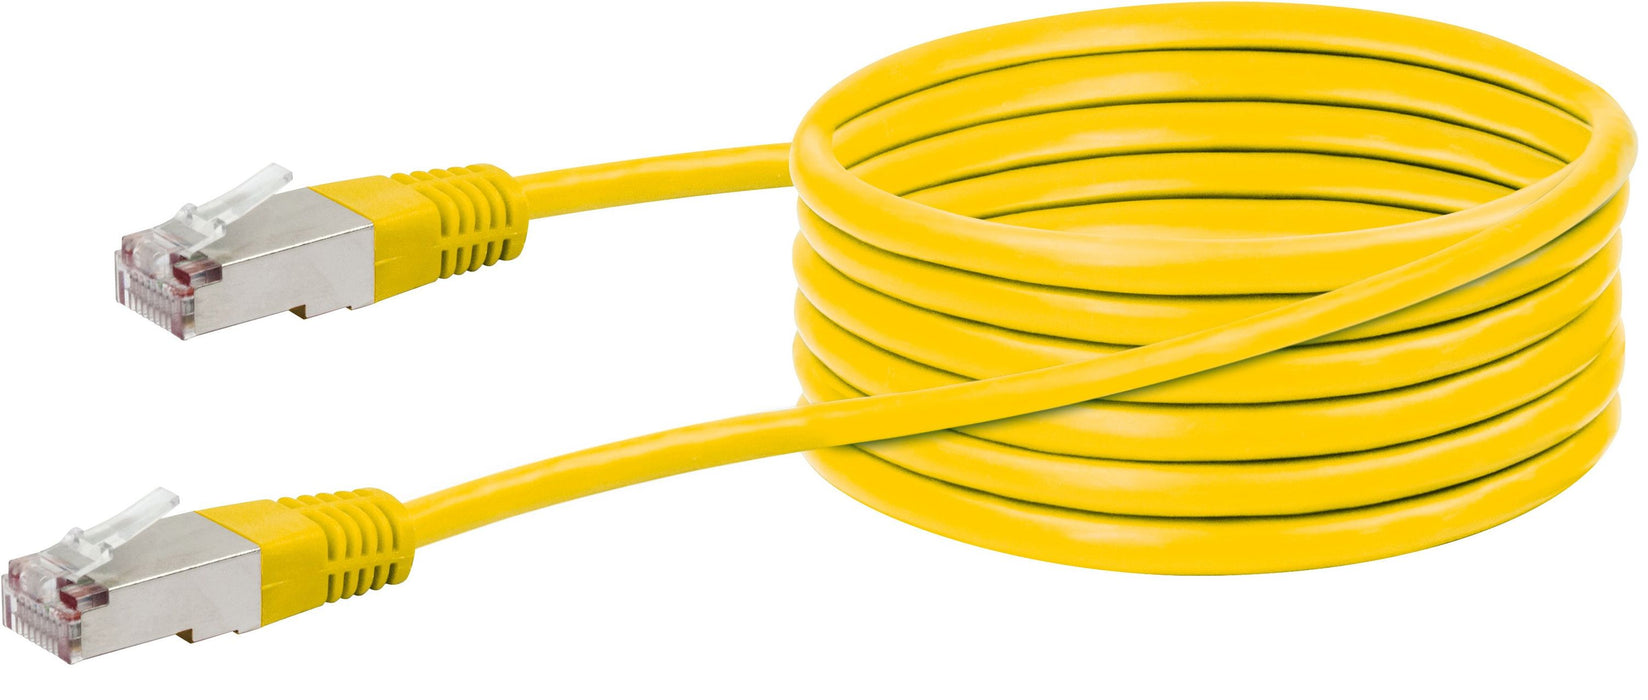 CAT 5e network cable (STP)